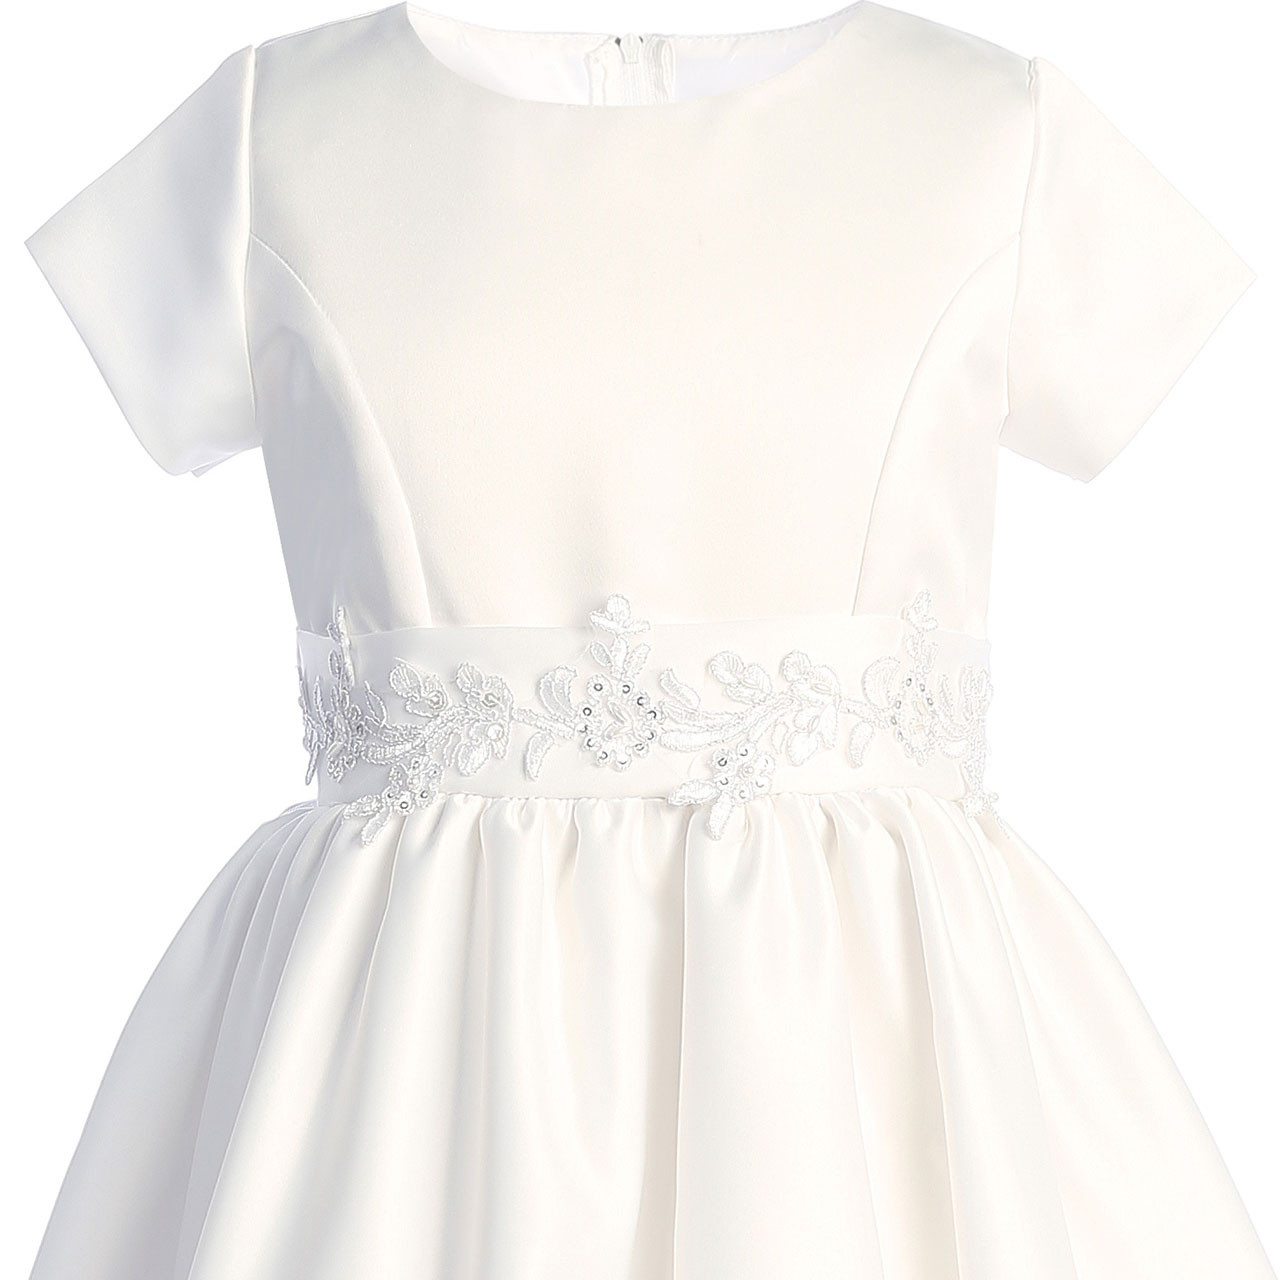 Detail of the Waist Accent for the Extended Size Kyla Communion Dress